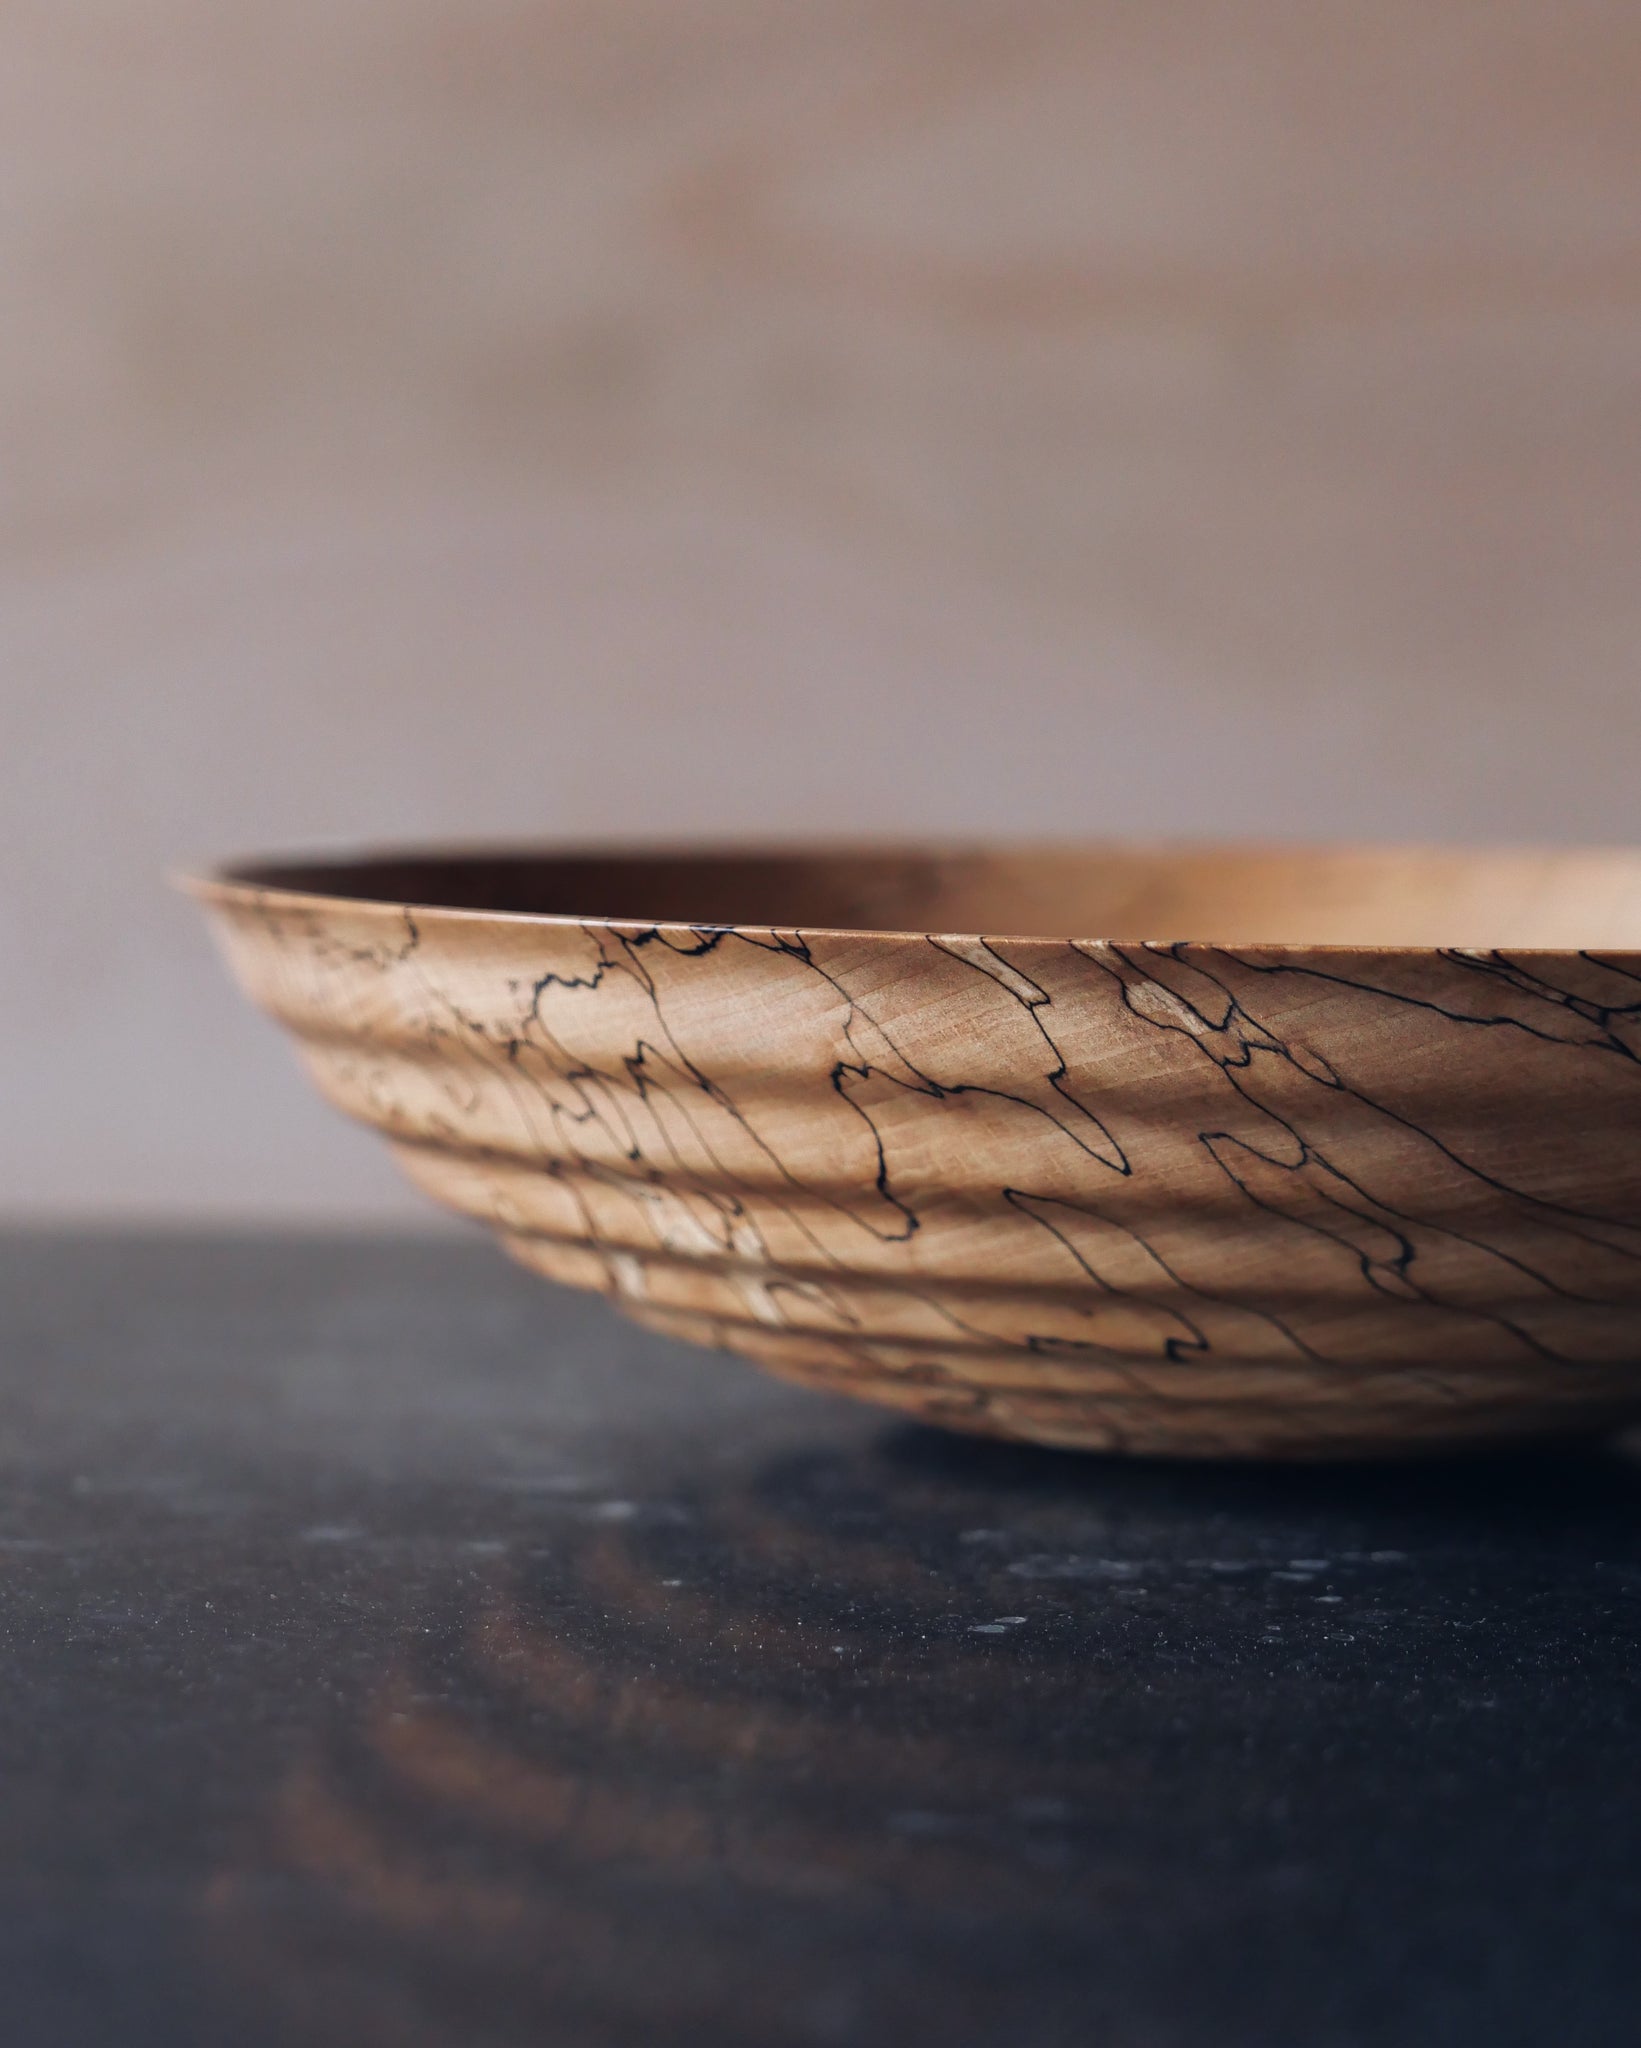 Waved Bowl - in Spalted Beech